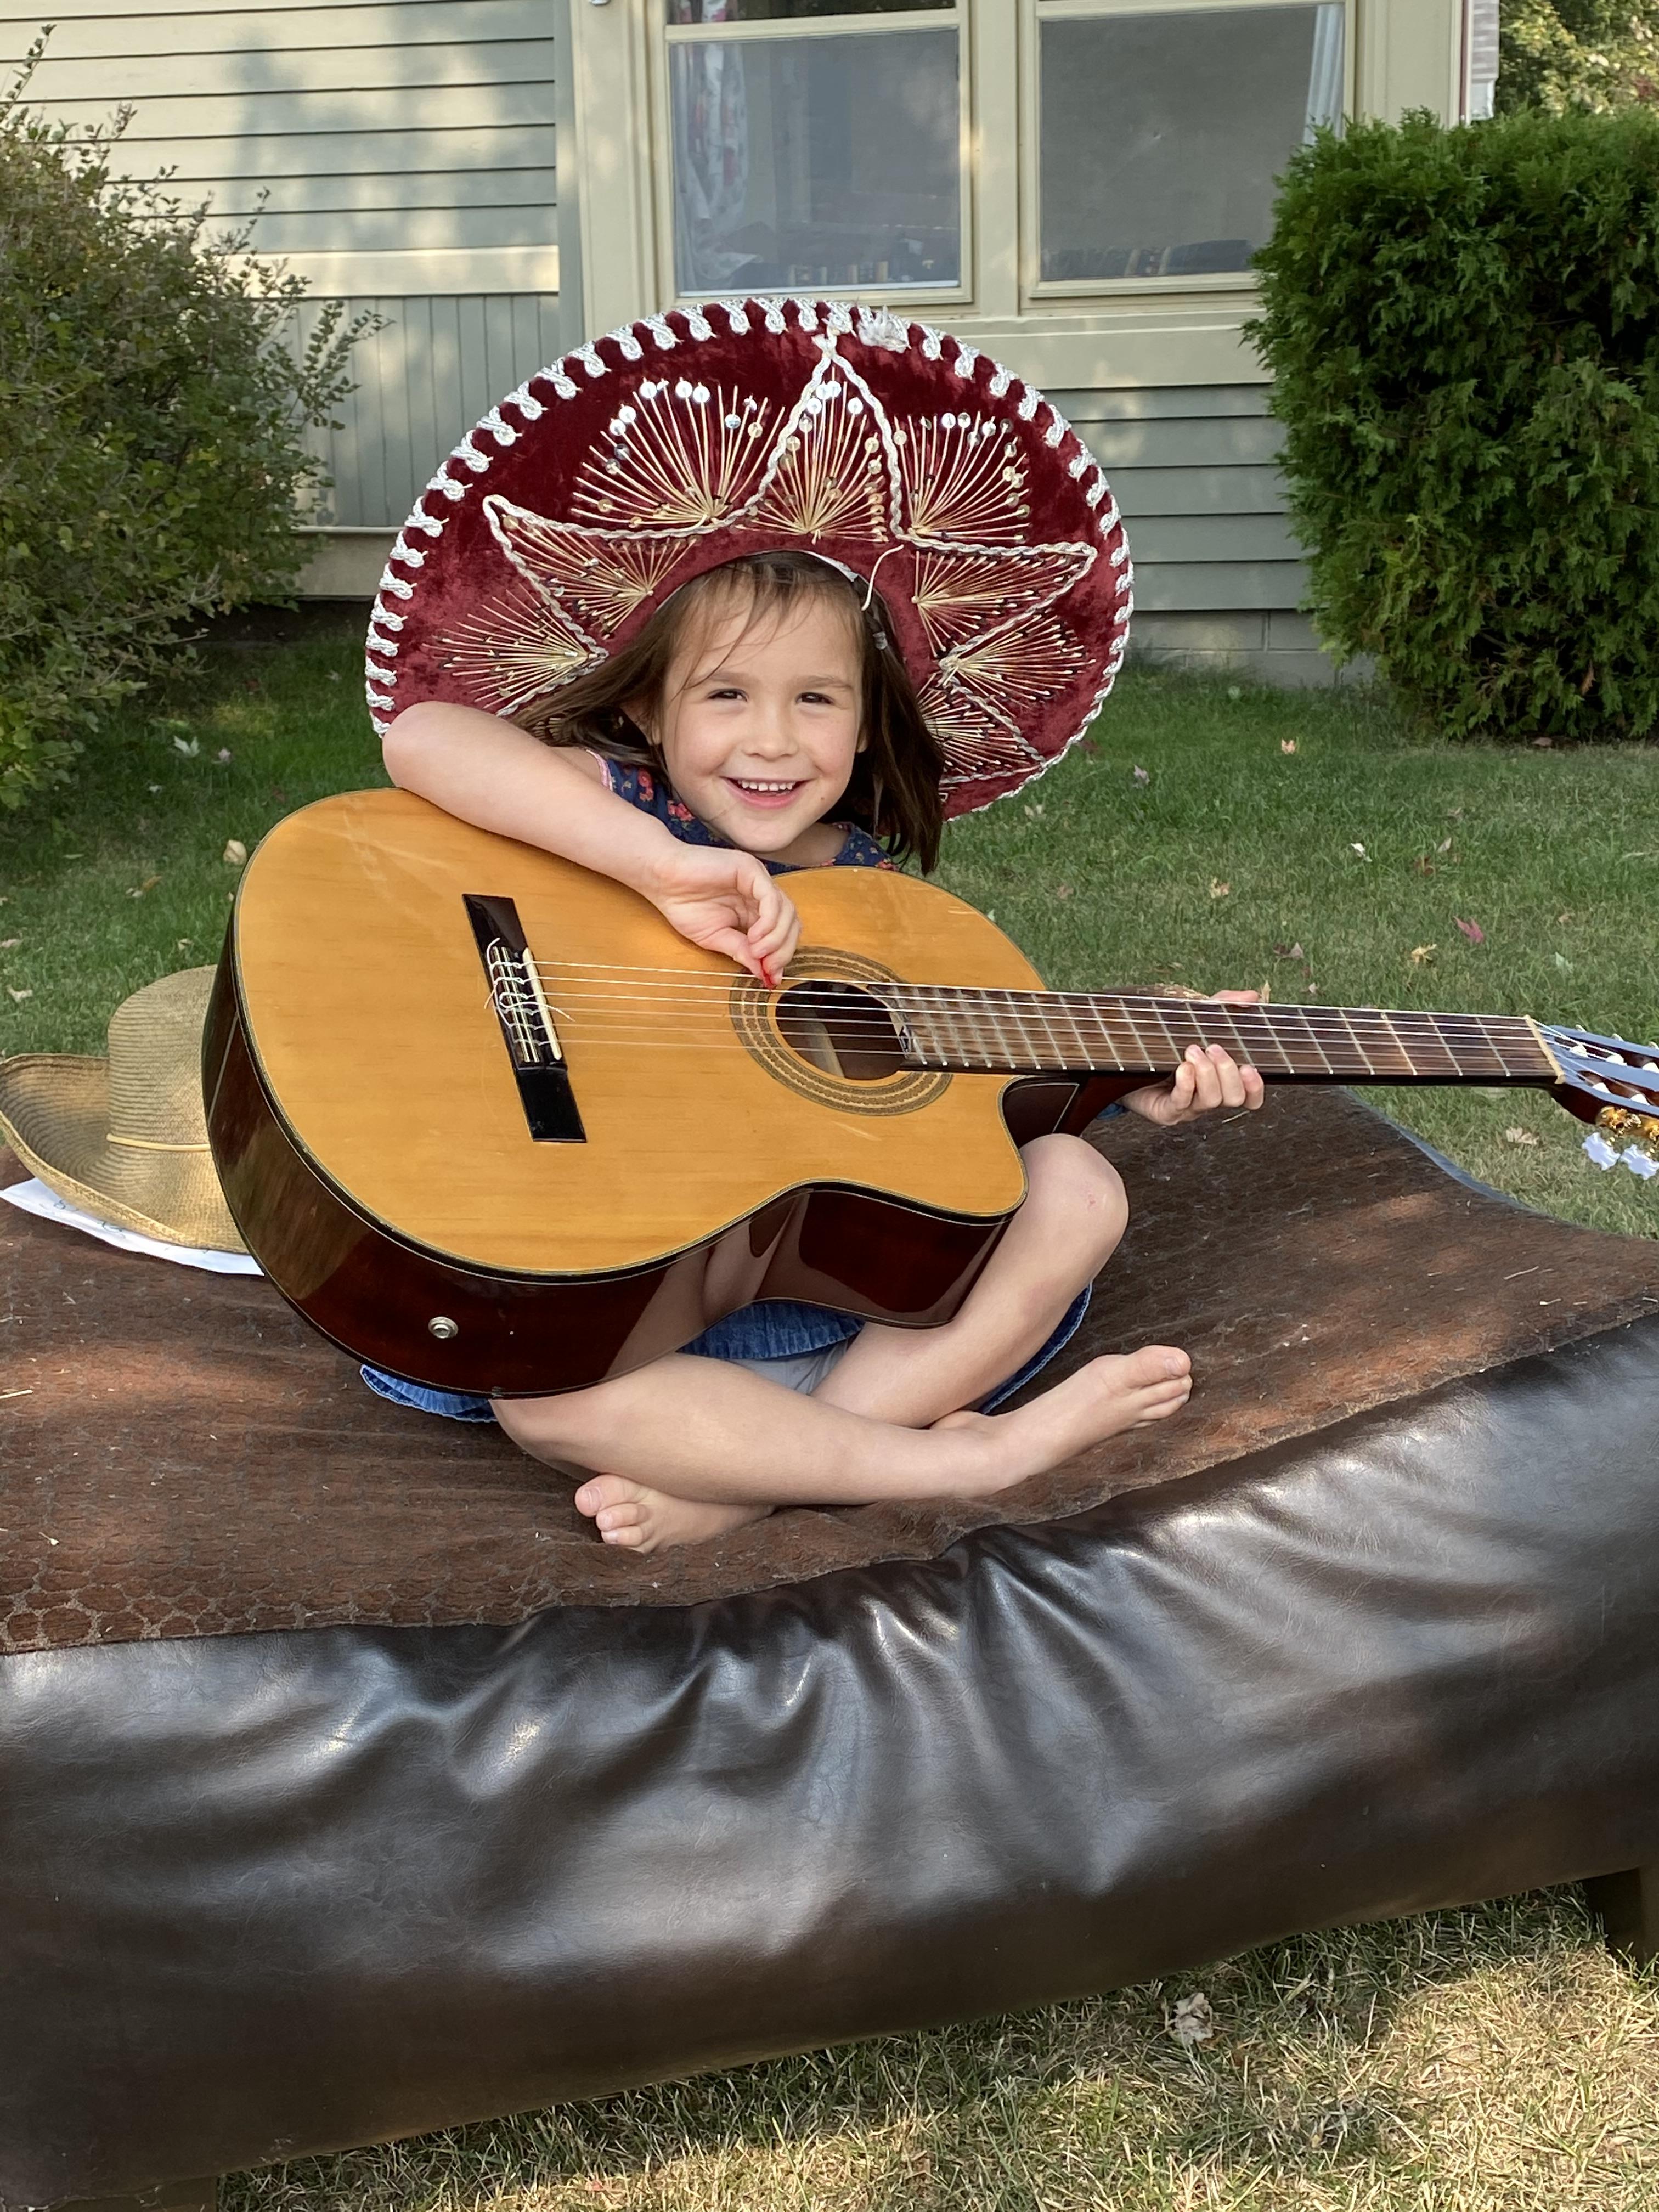 music with mexican hat